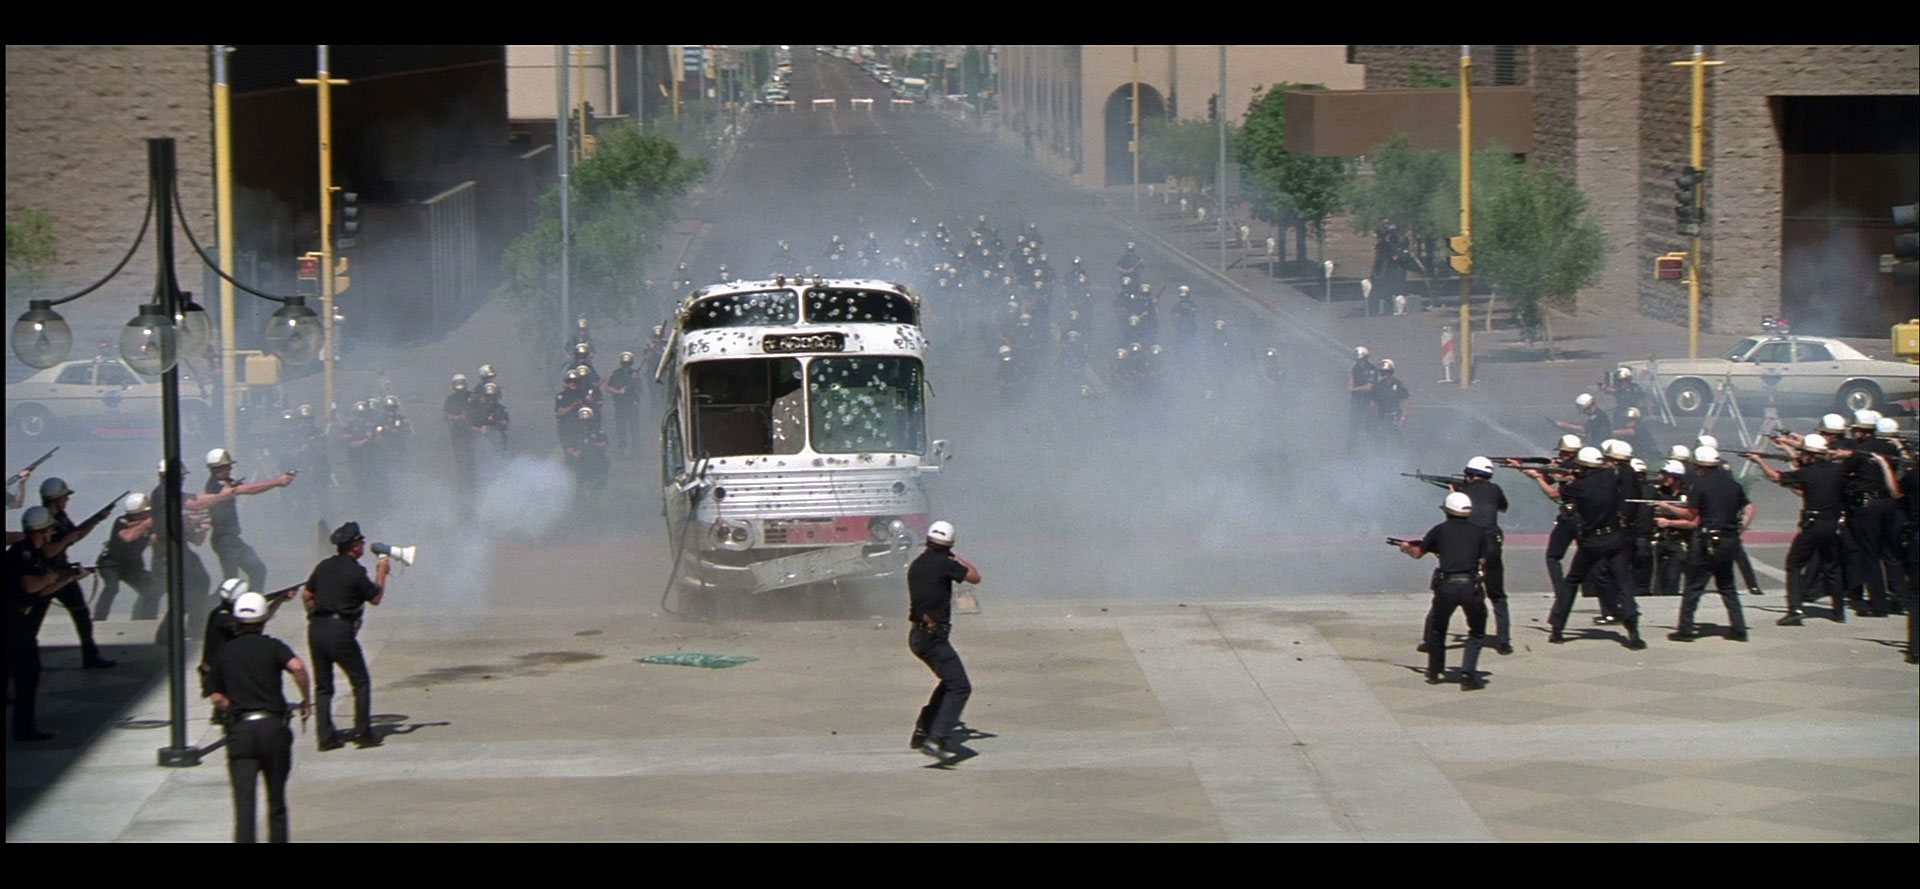 A bus riddled with bullet holes, surrounded by smoke, comes to a stop in the middle of hundreds of police with rifles shooting and shooting.